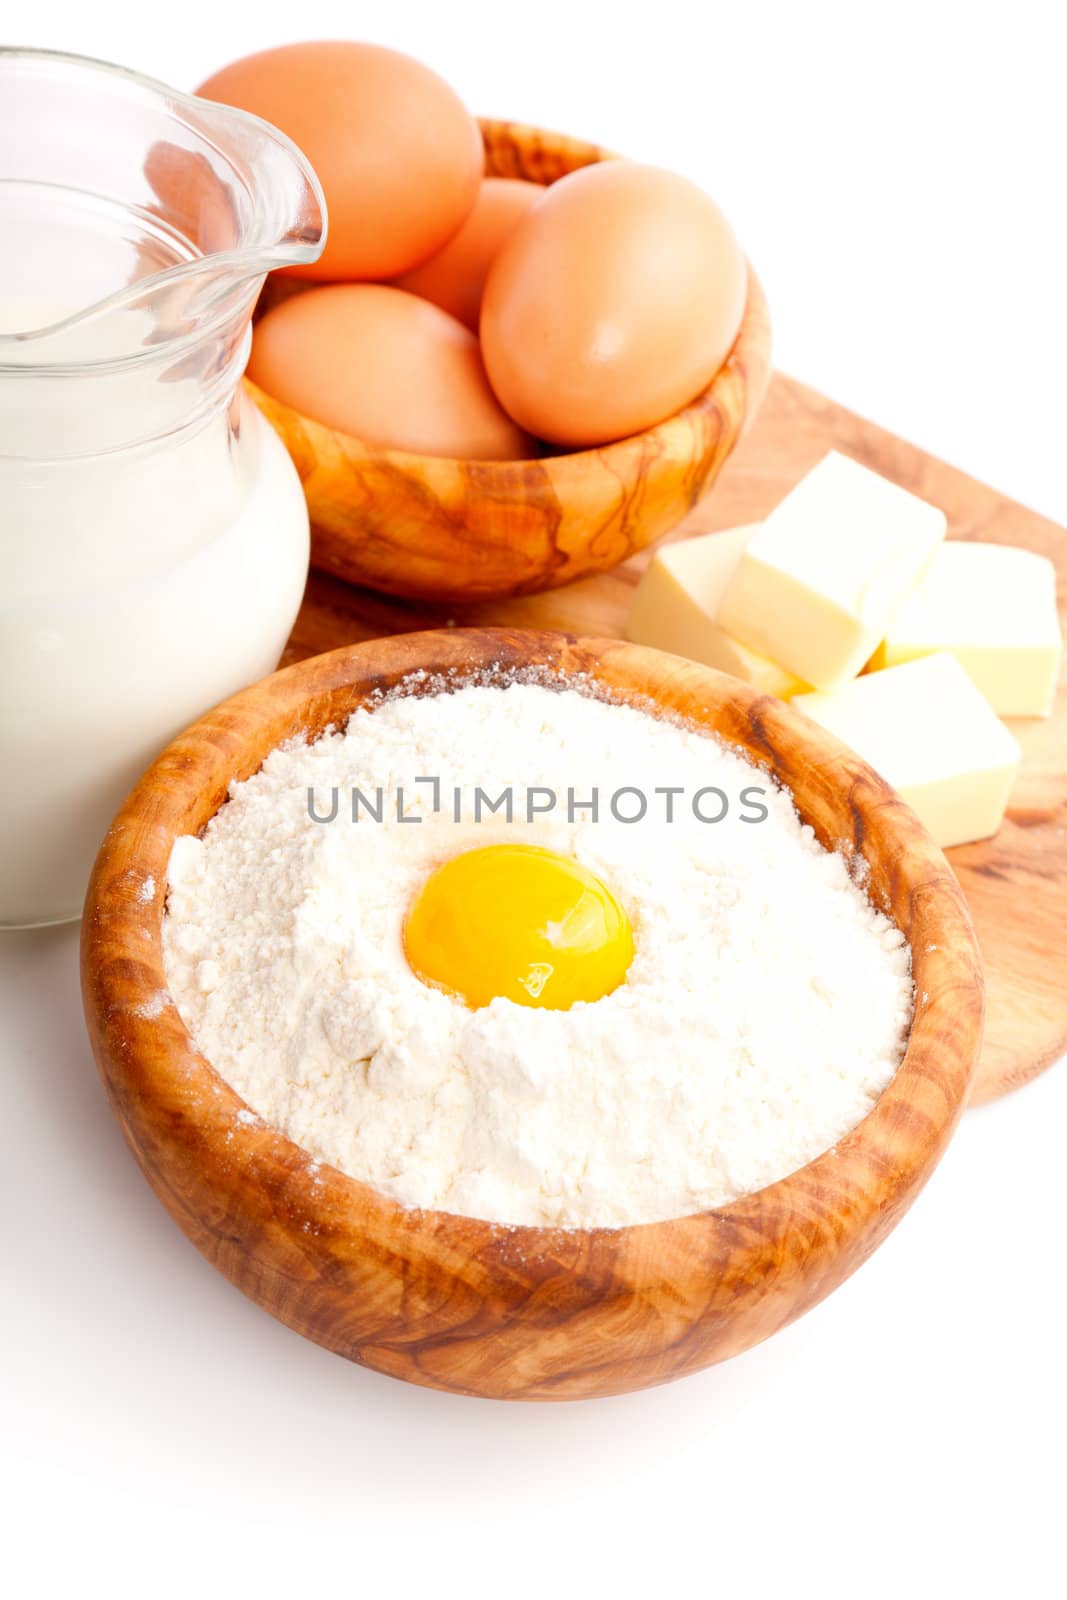 ingredients for baking, isolated on a white background  by motorolka